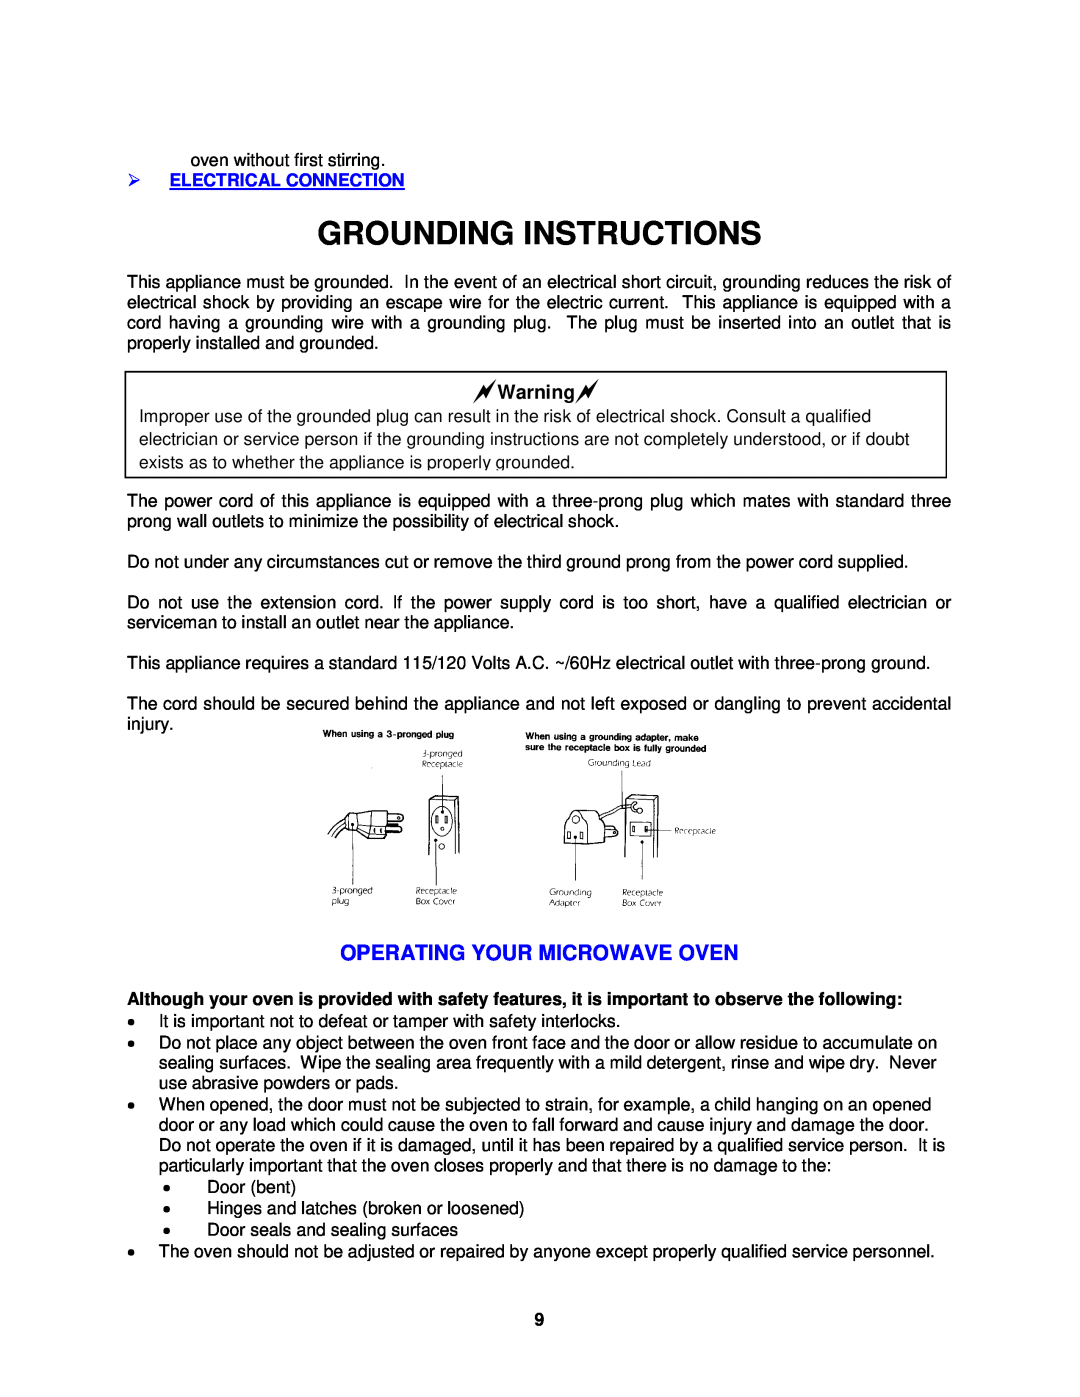 Avanti MO8004MST Grounding Instructions, Operating Your Microwave Oven, Warning, Electrical Connection 